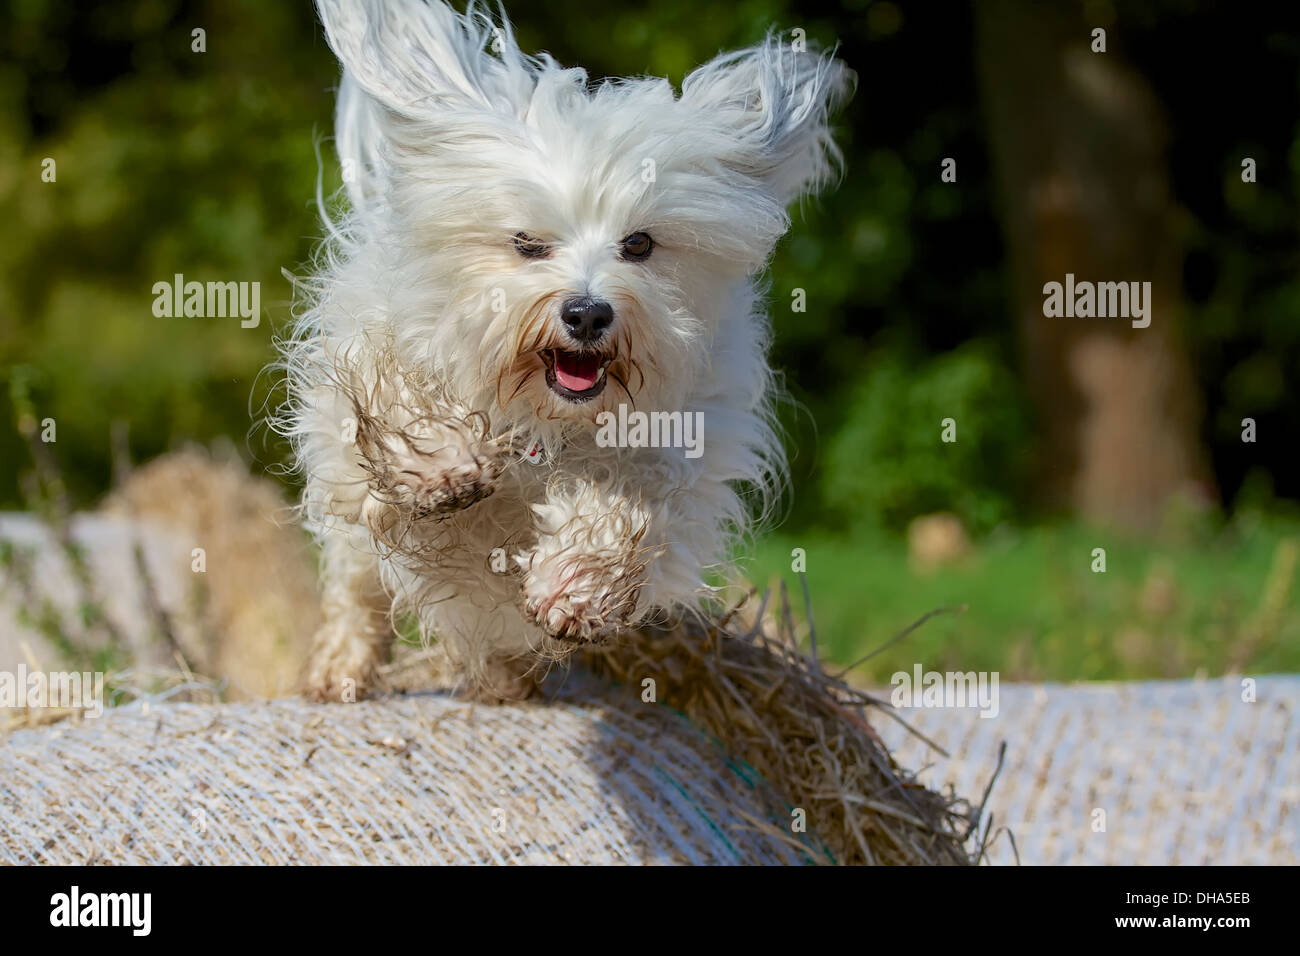 A dog jumps out of straw bales straw bales, while his fur bags right on. Stock Photo